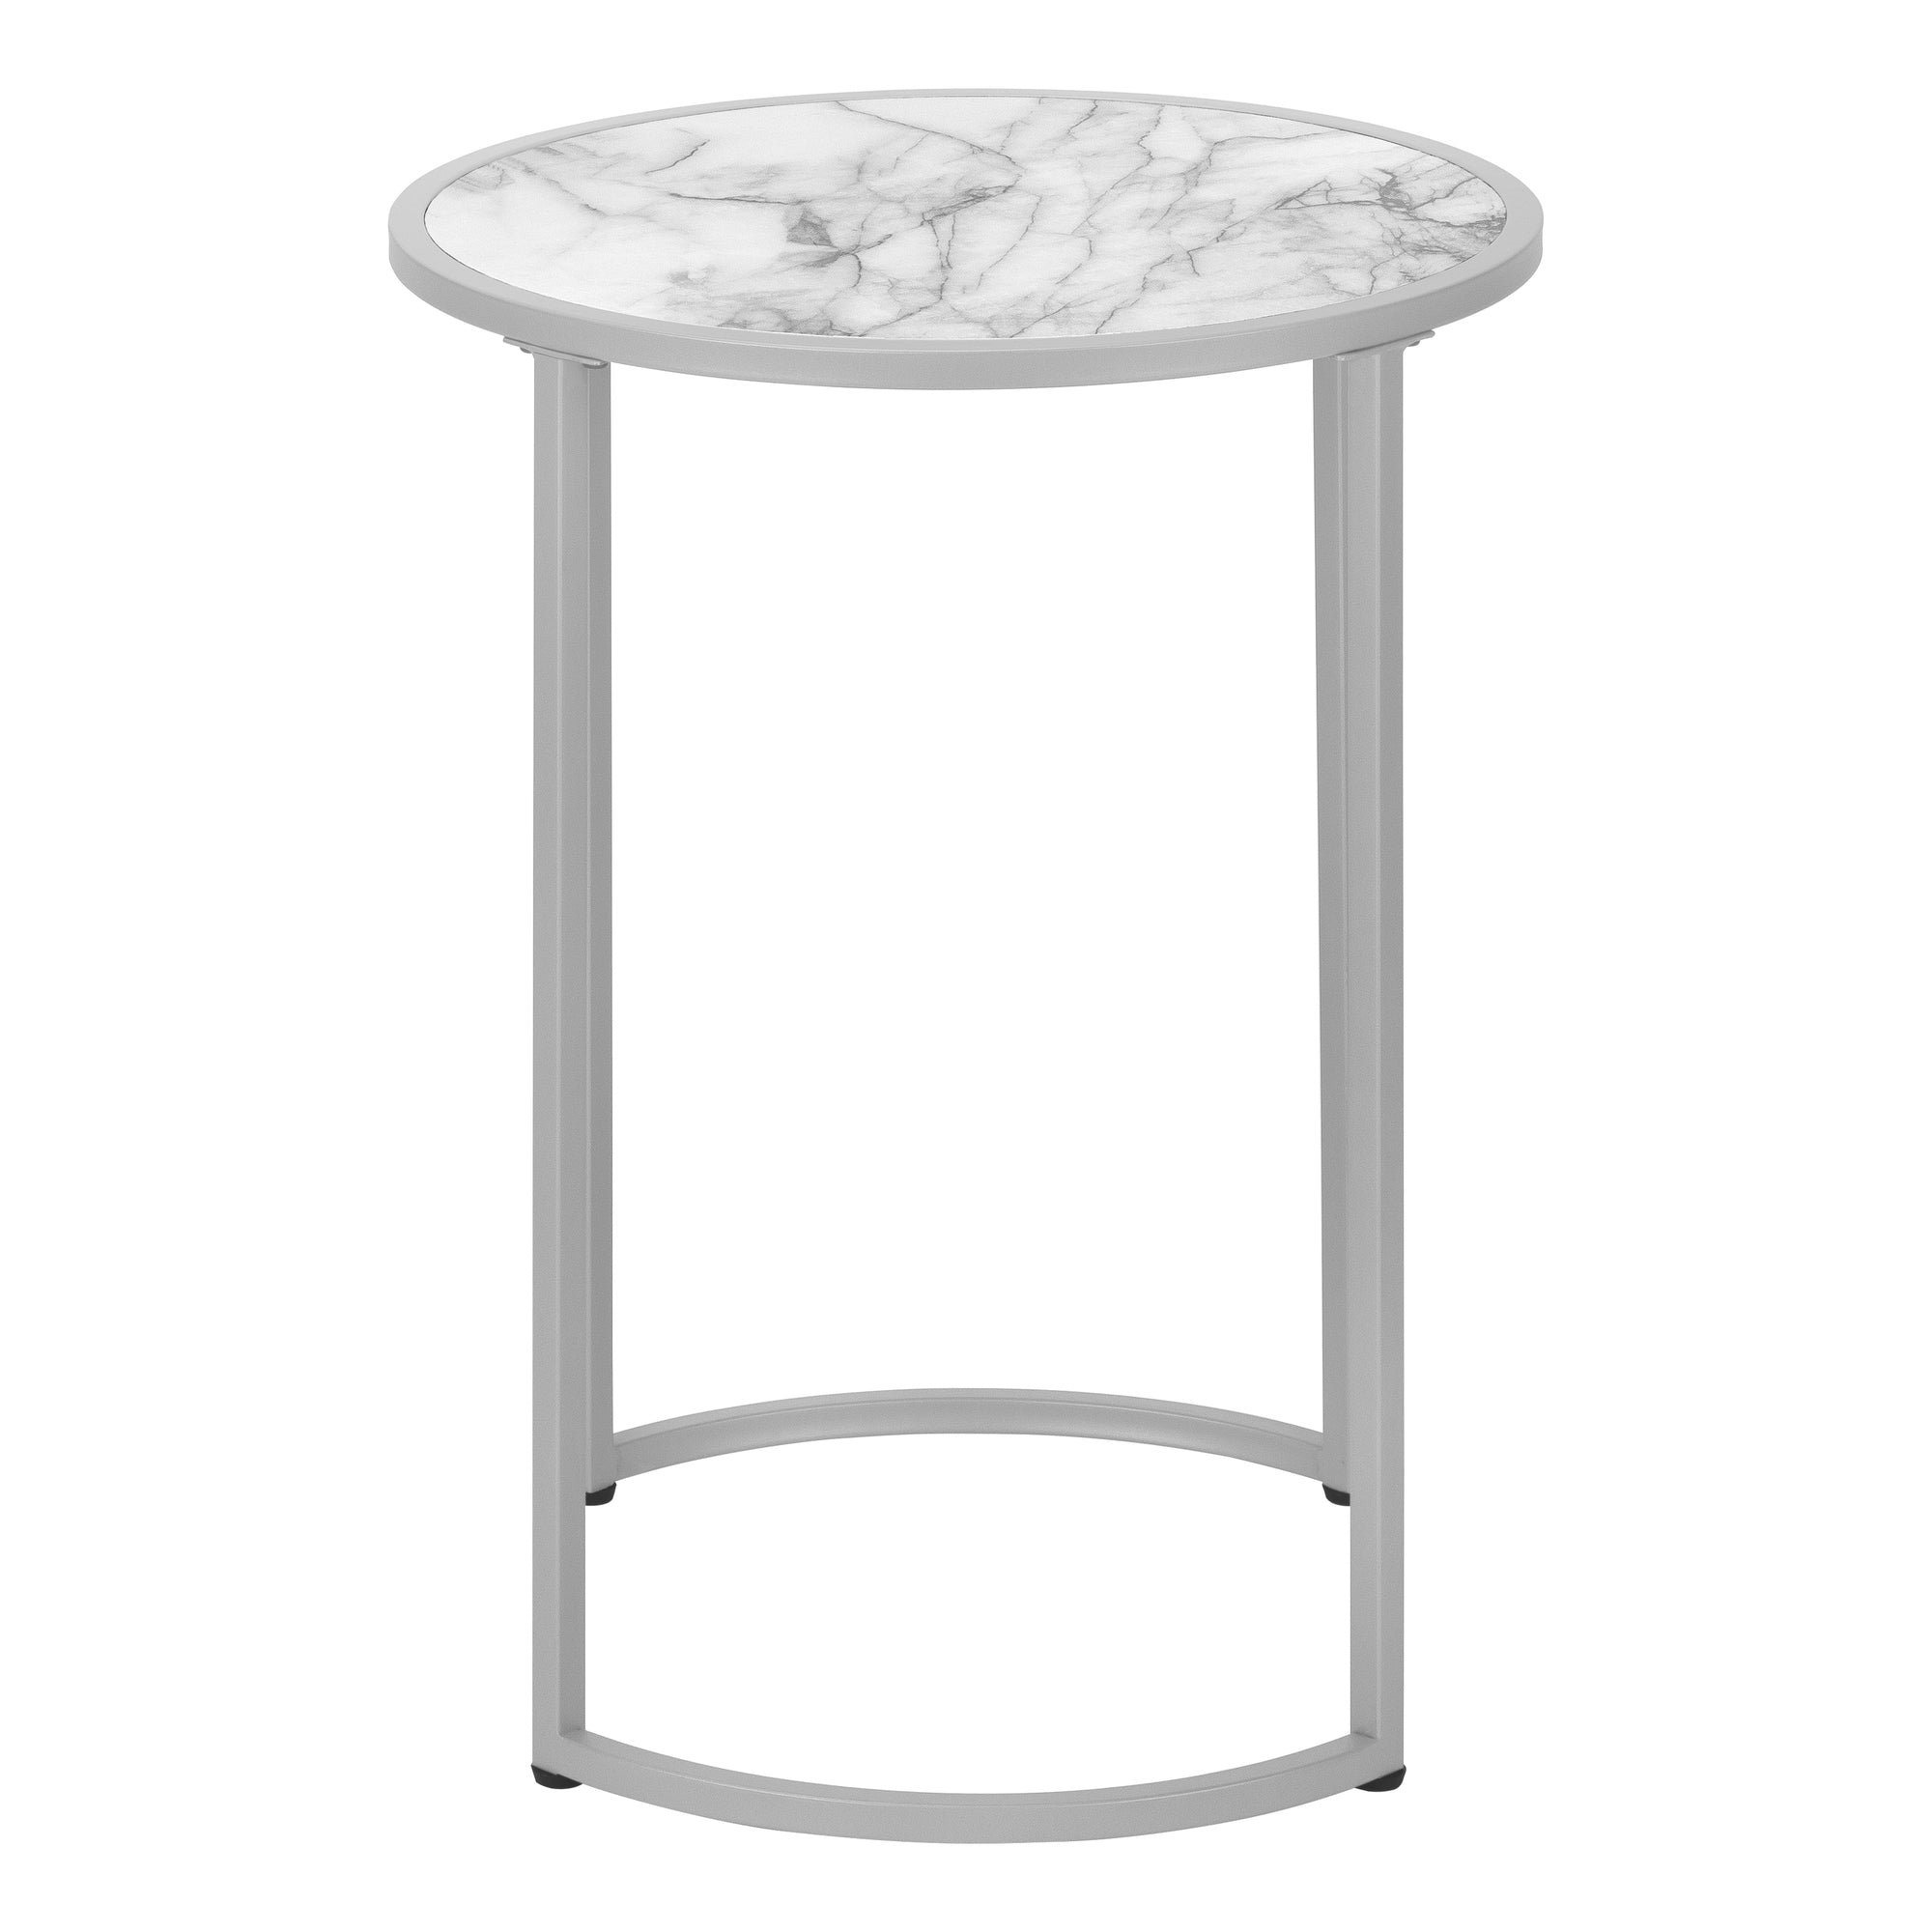 Accent Table - 24H / White Marble-Look / Silver Metal